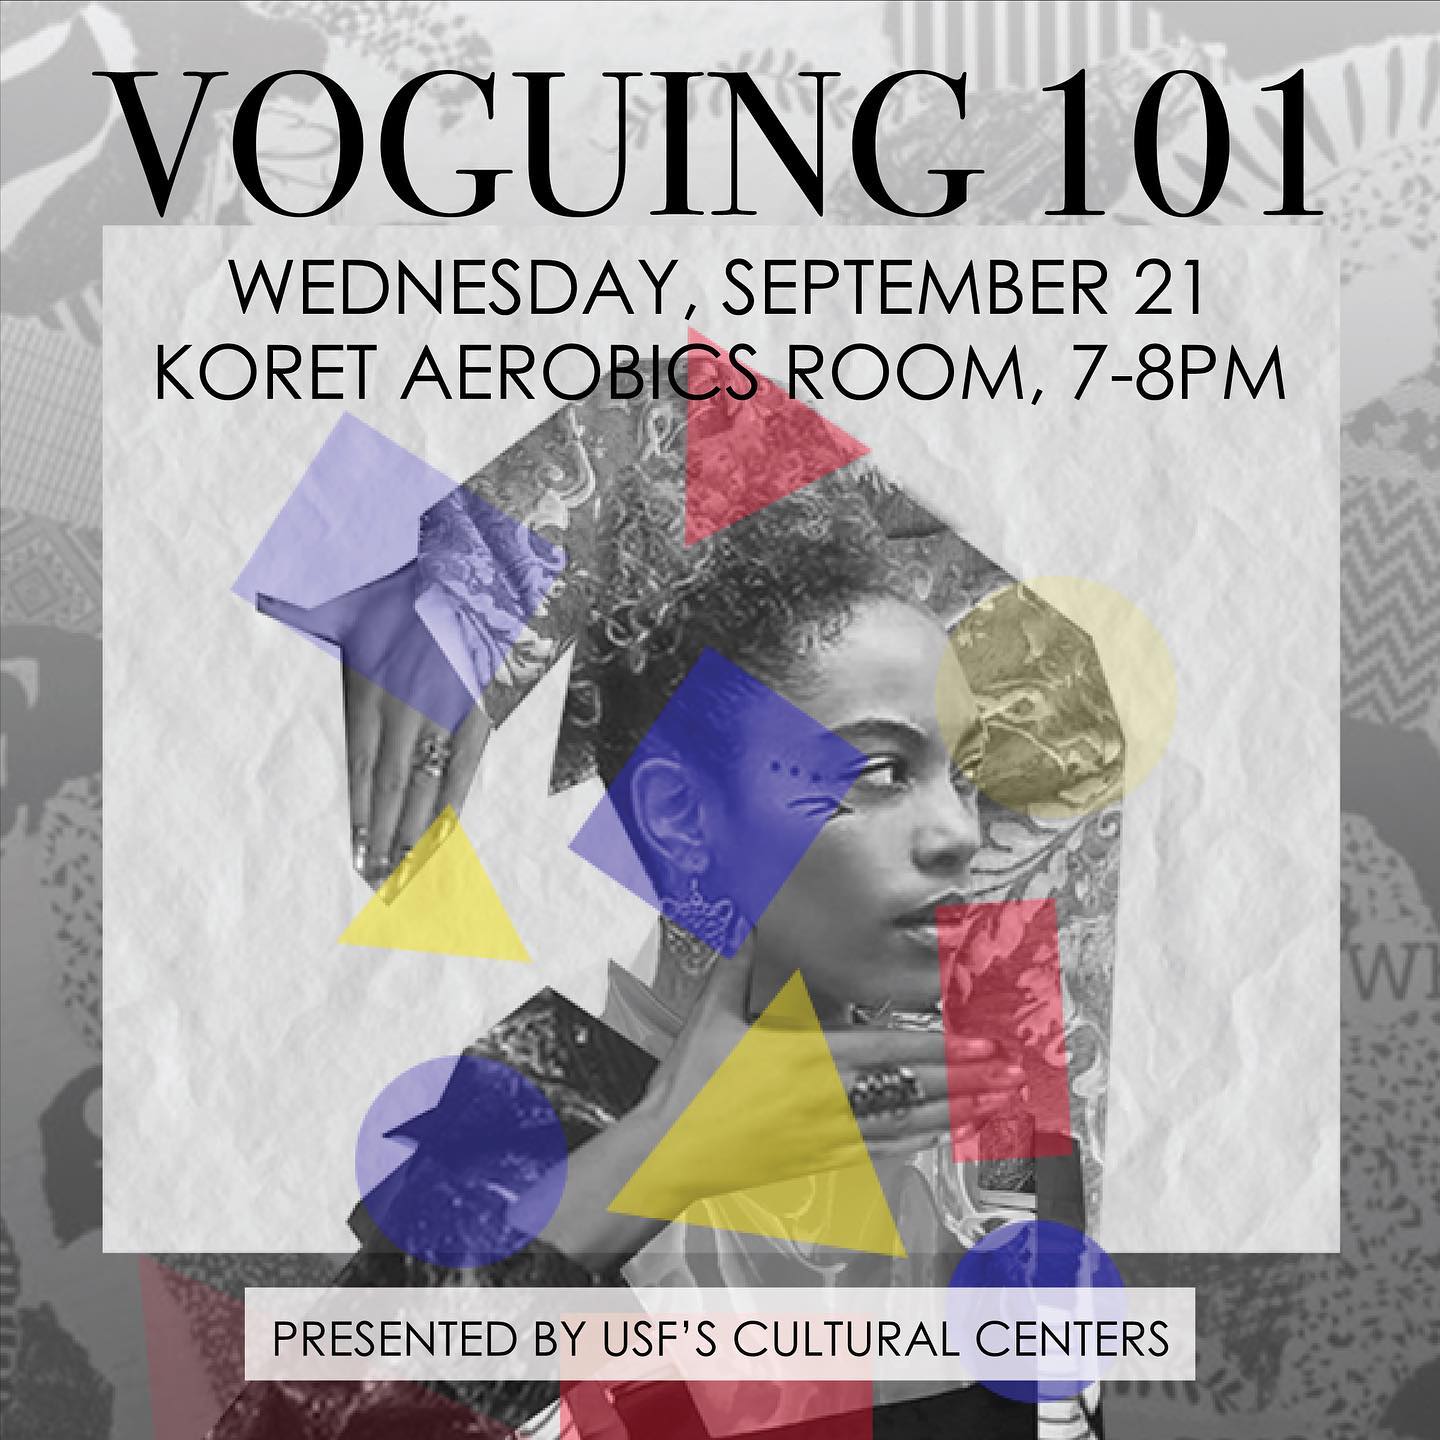 Magazine collage of a person fashioned in a voguing pose, with various shapes of semi transparent primary colors imposed on them. Voguing 101 Wednesday September 21 Koret aerobics room. 7 to 8 PM  Presented by USF‘s cultural centers